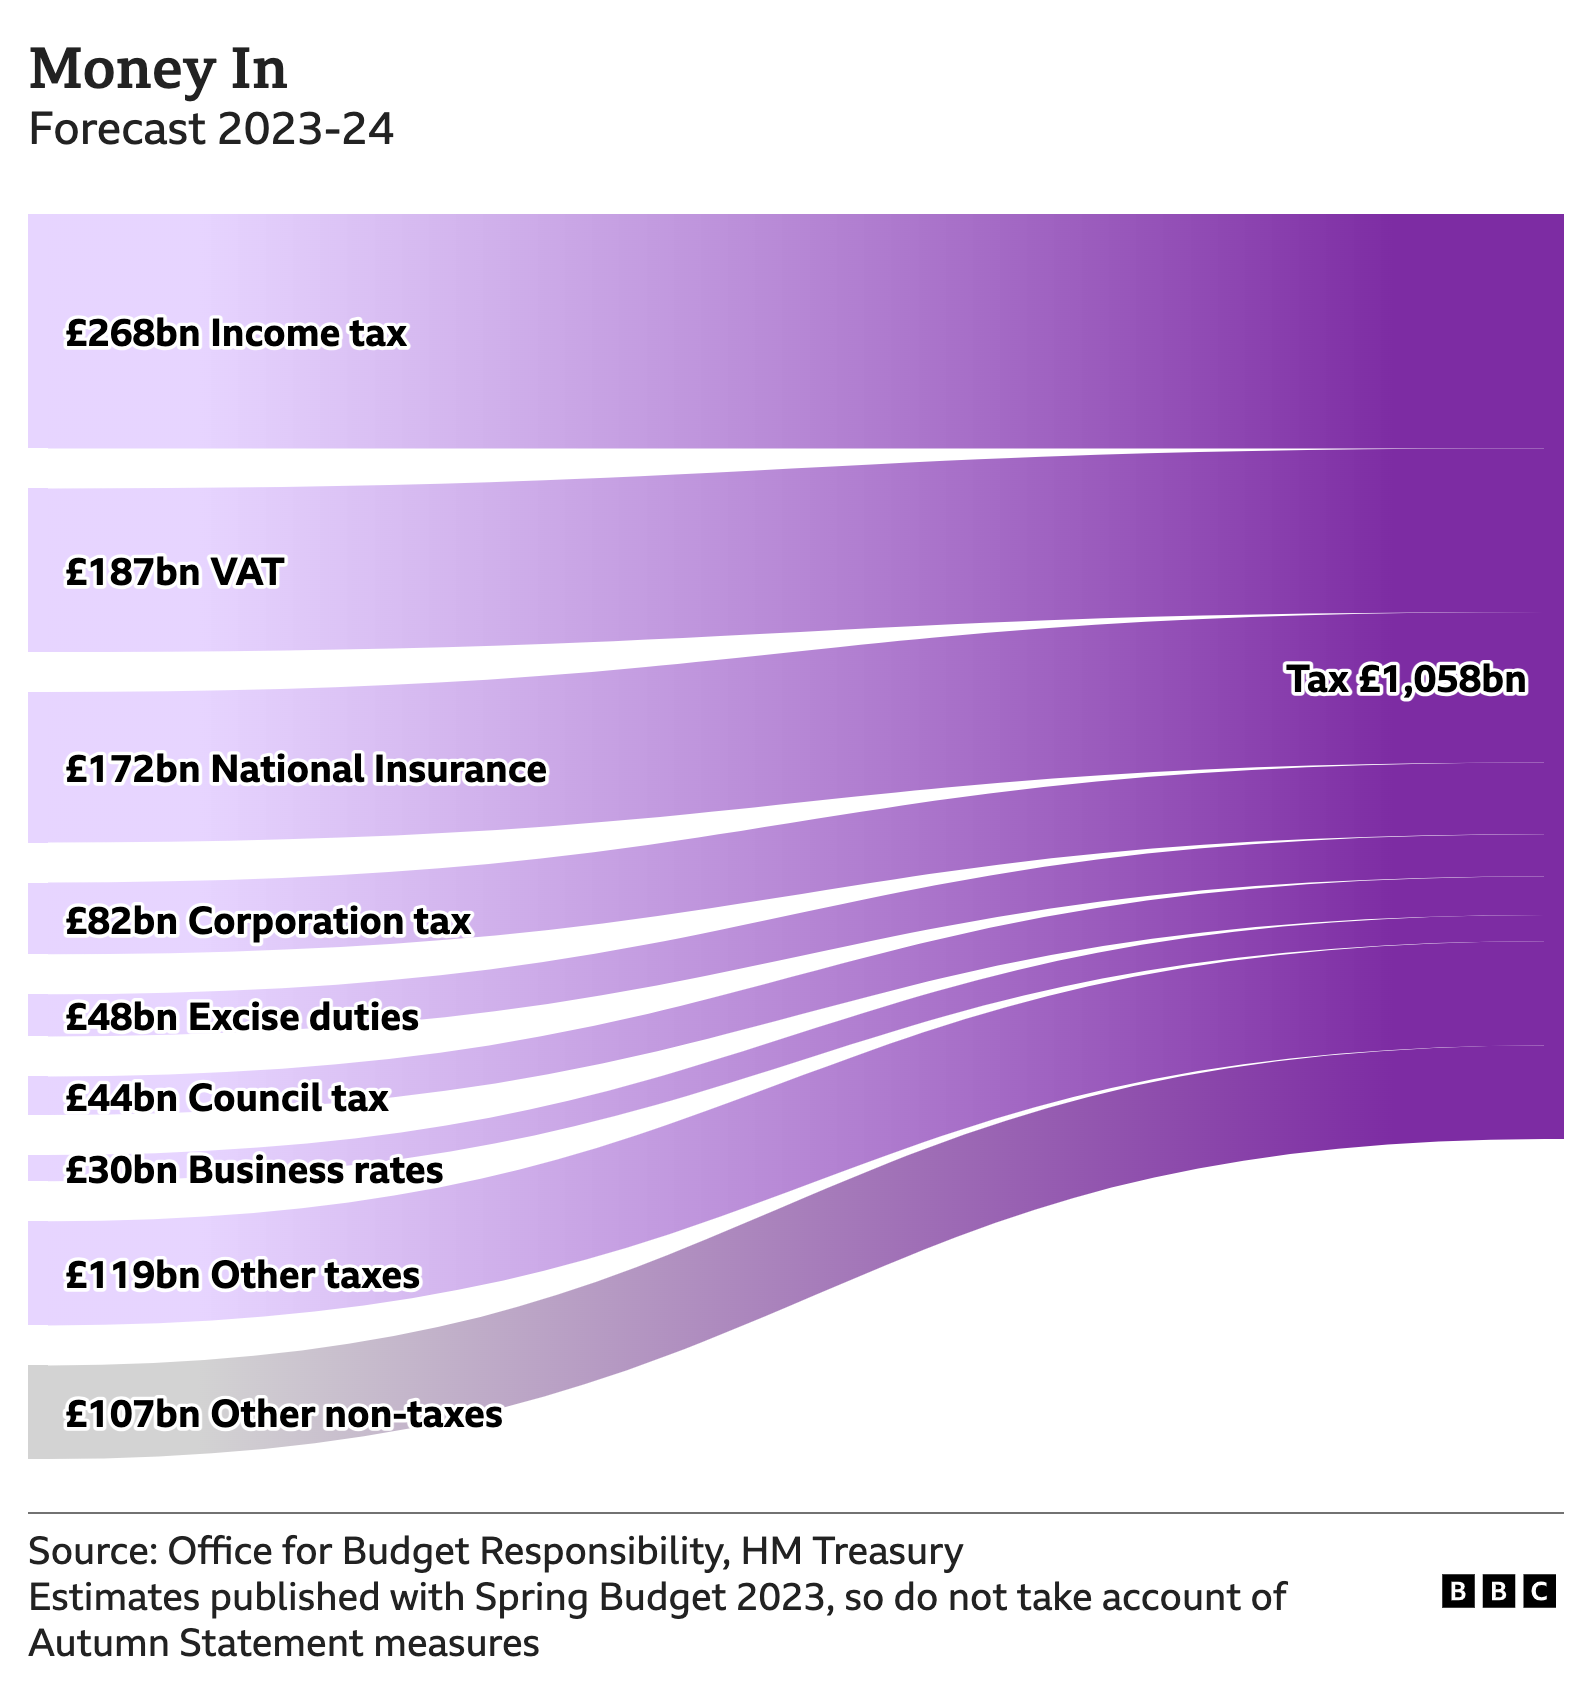 Chart showing the £1058bn expected to come into the government this year. Income tax is the top earner at £268bn followed by VAT at £187bn and National Insurance at £172bn